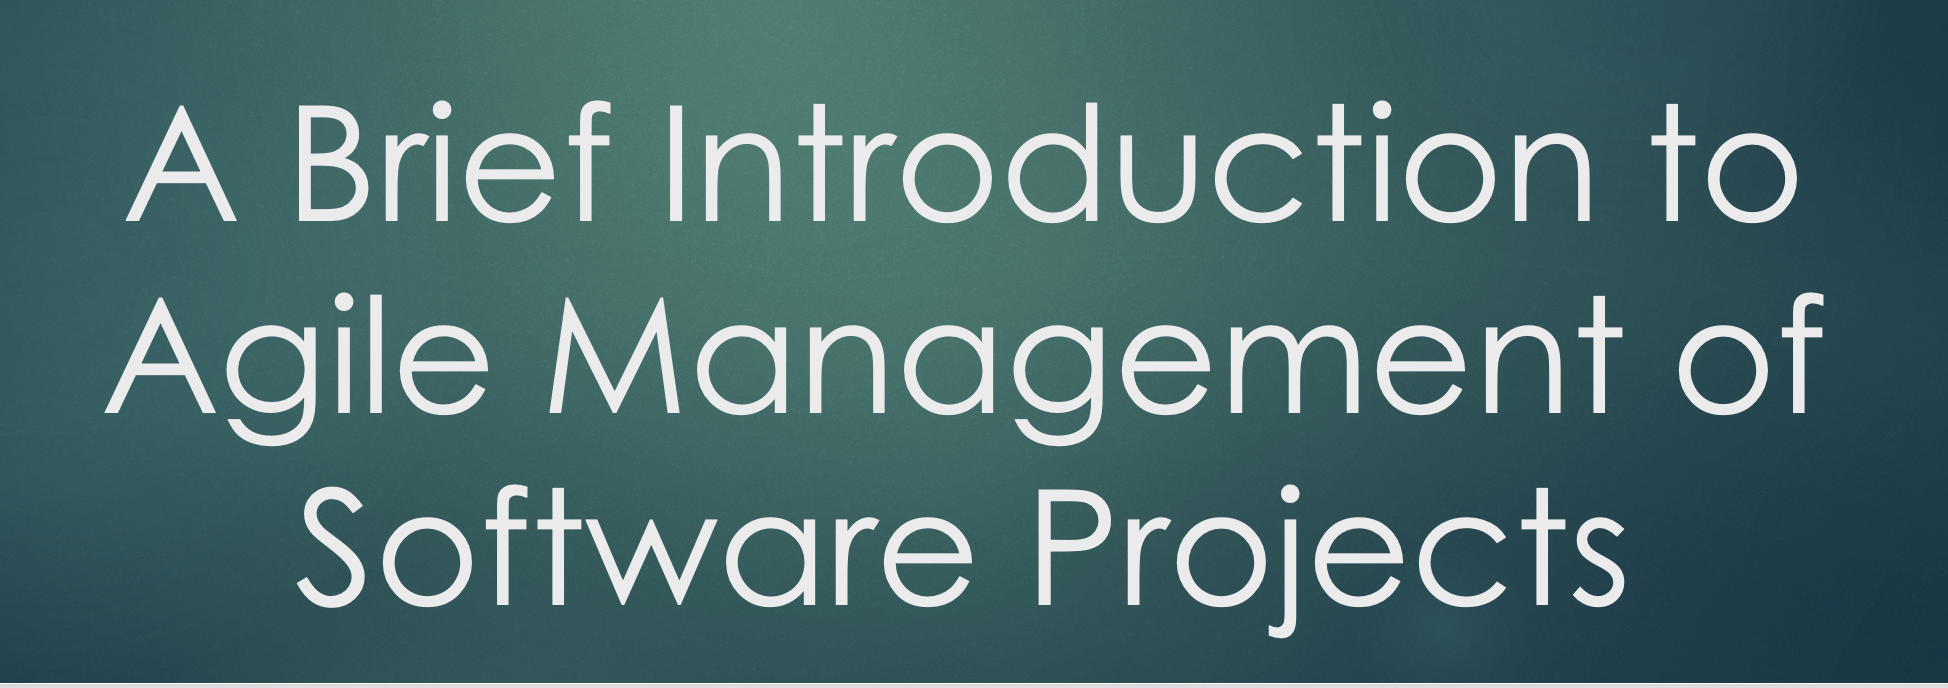 A Brief Introduction to Agile Management of Software Projects